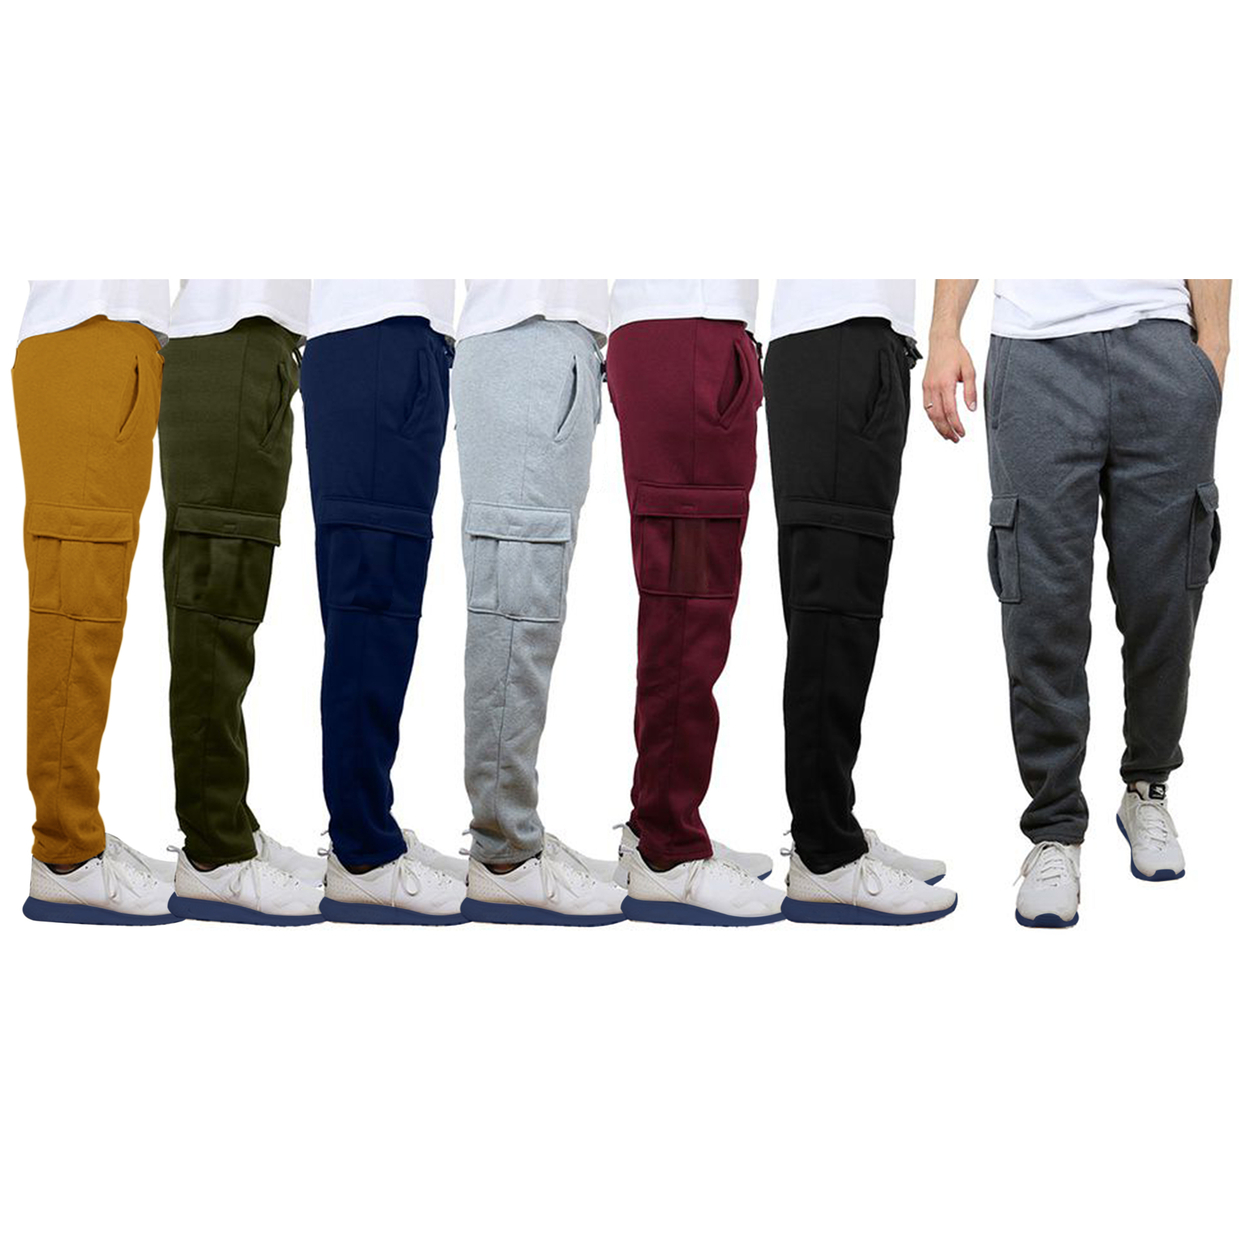 Multipack Men's Casual Solid Cargo Jogger Sweatpants With Pockets - 1, M